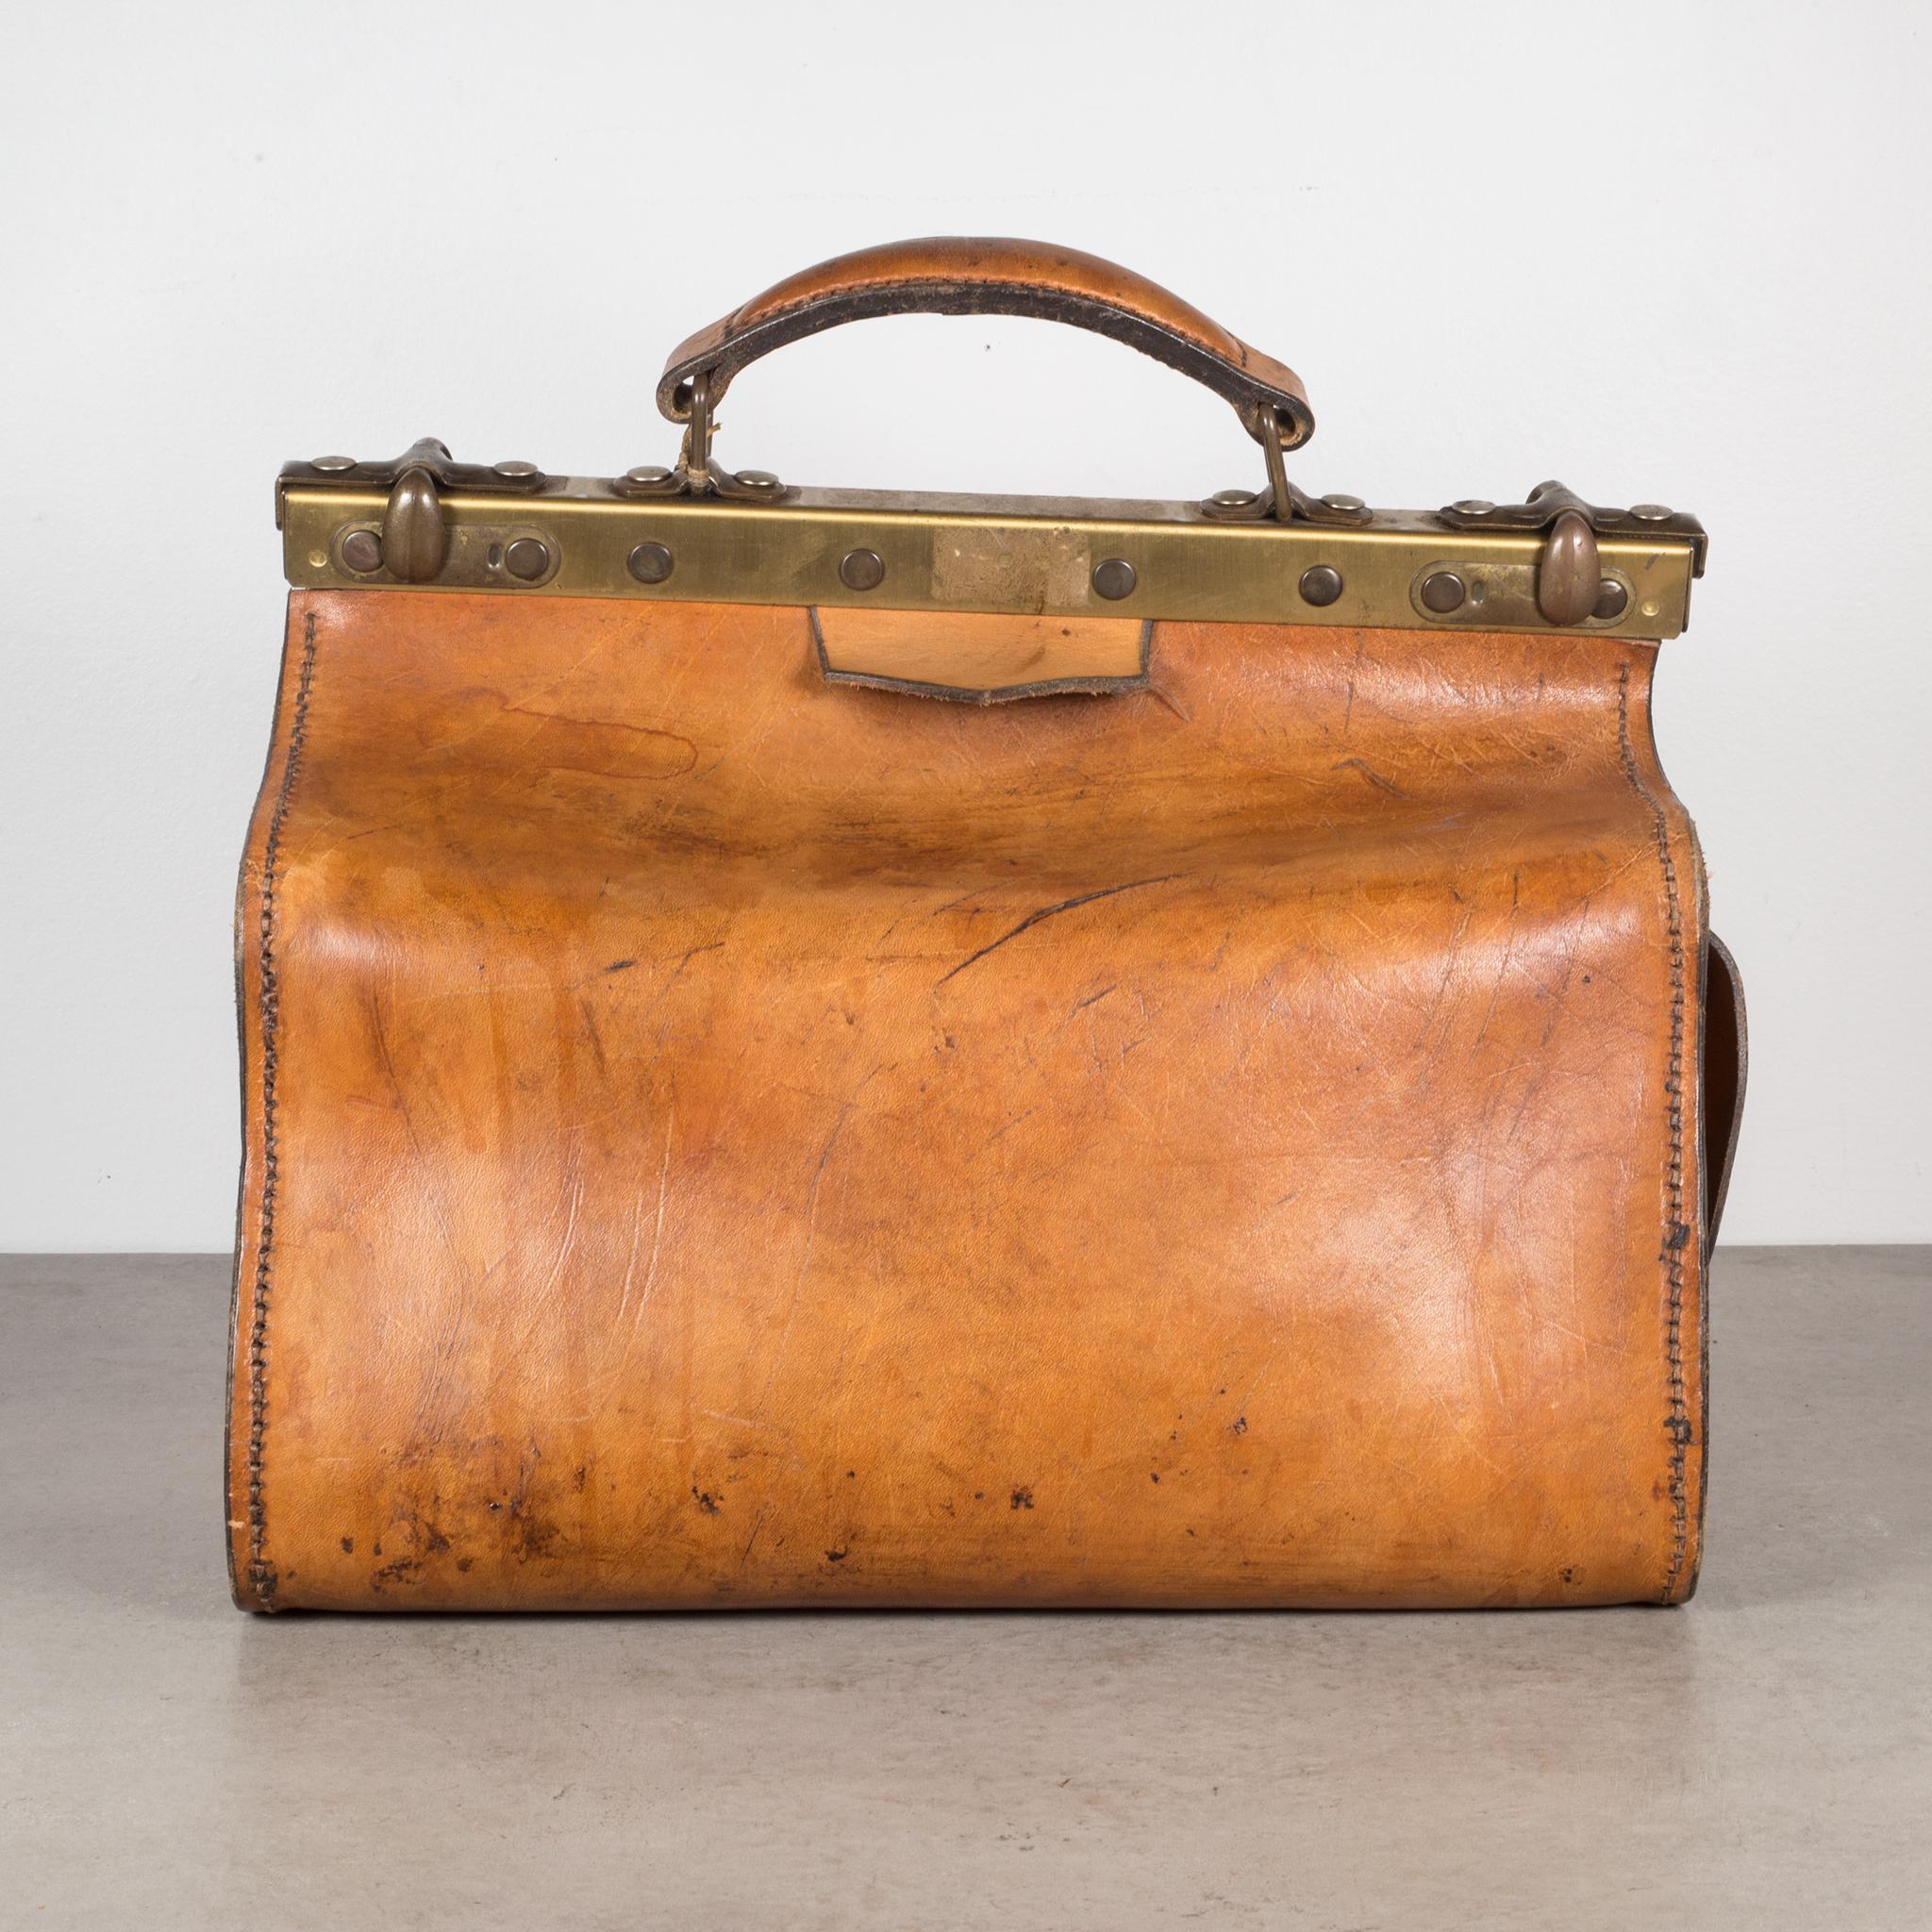 About

An original leather doctor's examination bag used to make house calls. The large interior is locked into place by brass brackets. The tobacco colored bag has one side pocket, brass and bronze locks, brass key, and a leather handle. Very